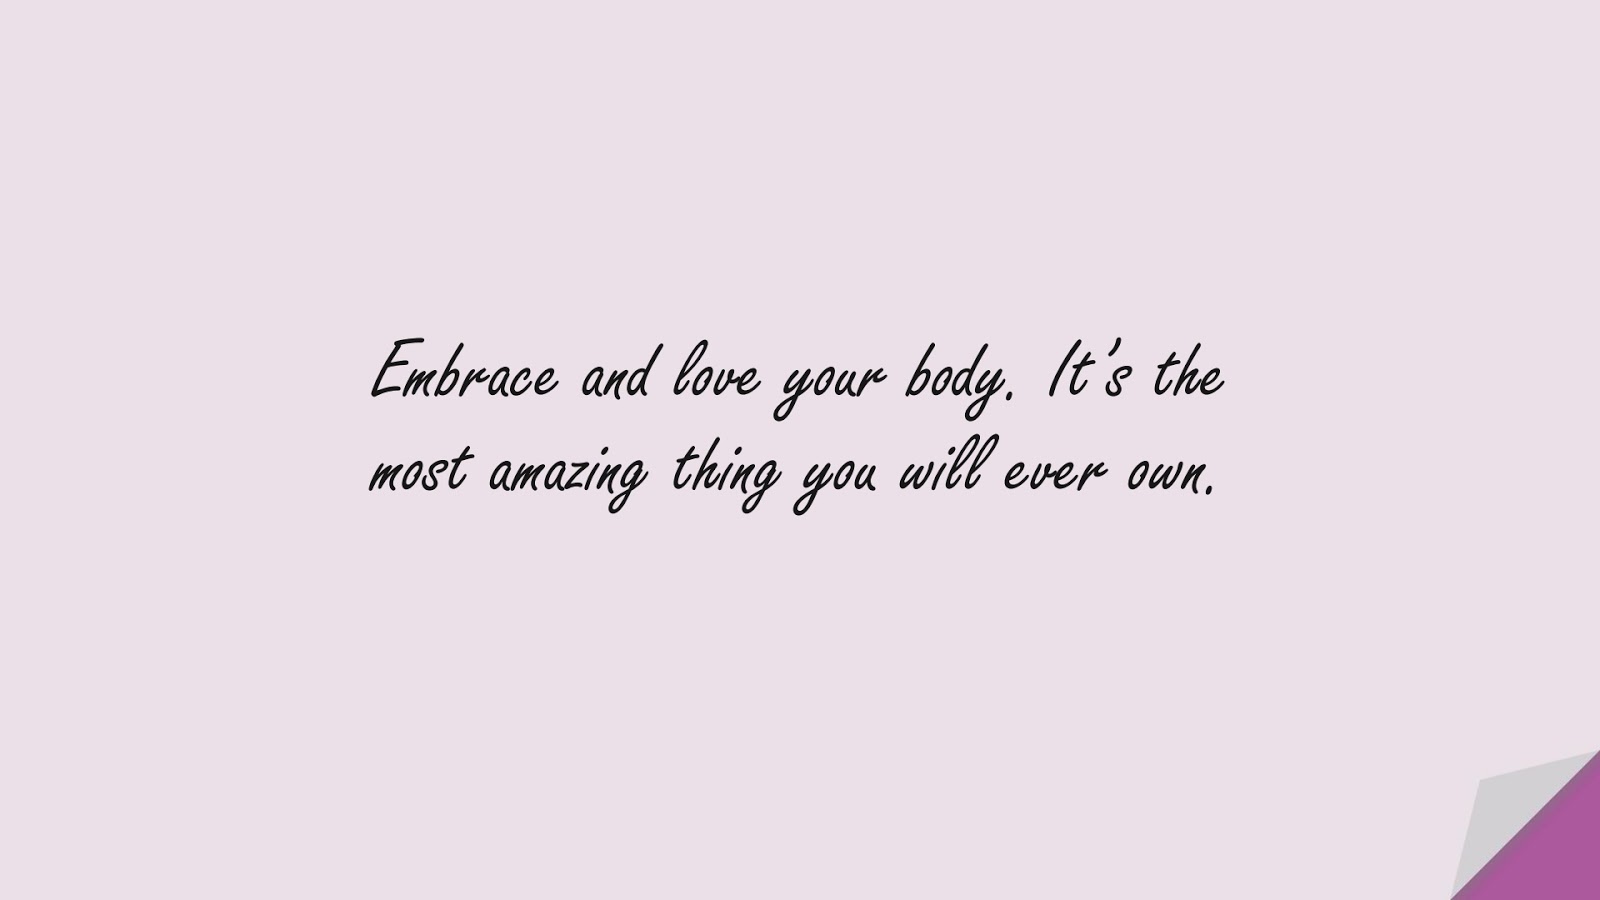 Embrace and love your body. It’s the most amazing thing you will ever own.FALSE